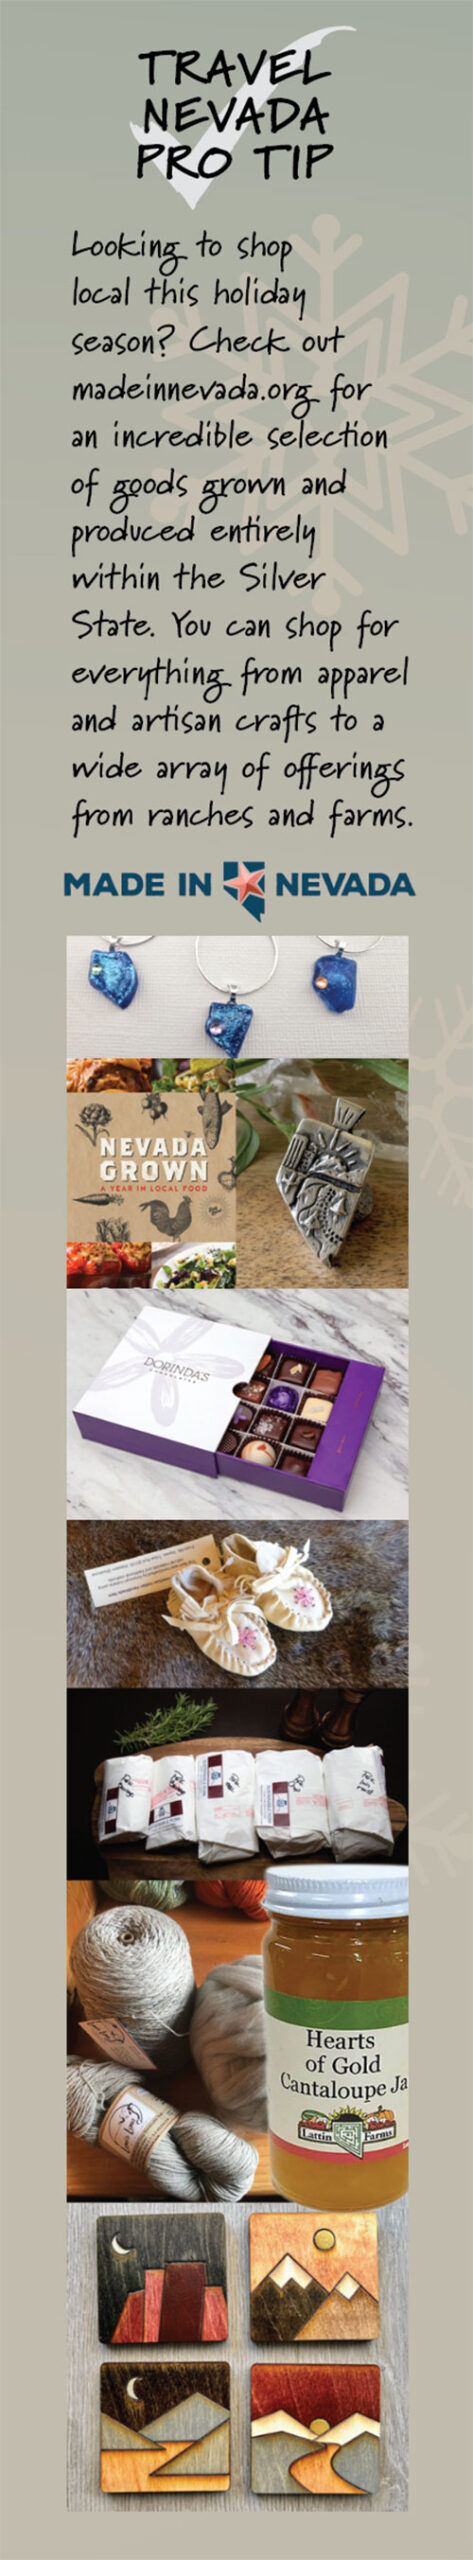 Made in Nevada sidebar, says "Looking to shop local this holiday season? Check out madeinnevada.org for an incredible selection of goods grown and produced entirely within the Silver State. You can shop for everything from apparel and artisan crafts to a wide array of offerings from ranches and farms." Image shows necklaces with pendants in the shape of Nevada, a Nevada Grown cookbook, a pewter pin in the shape of Nevada, some chocolates, moccasins, wrapped meat, yarn, cantaloupe jam, and wooden coasters with stylized mountain scenes on them.